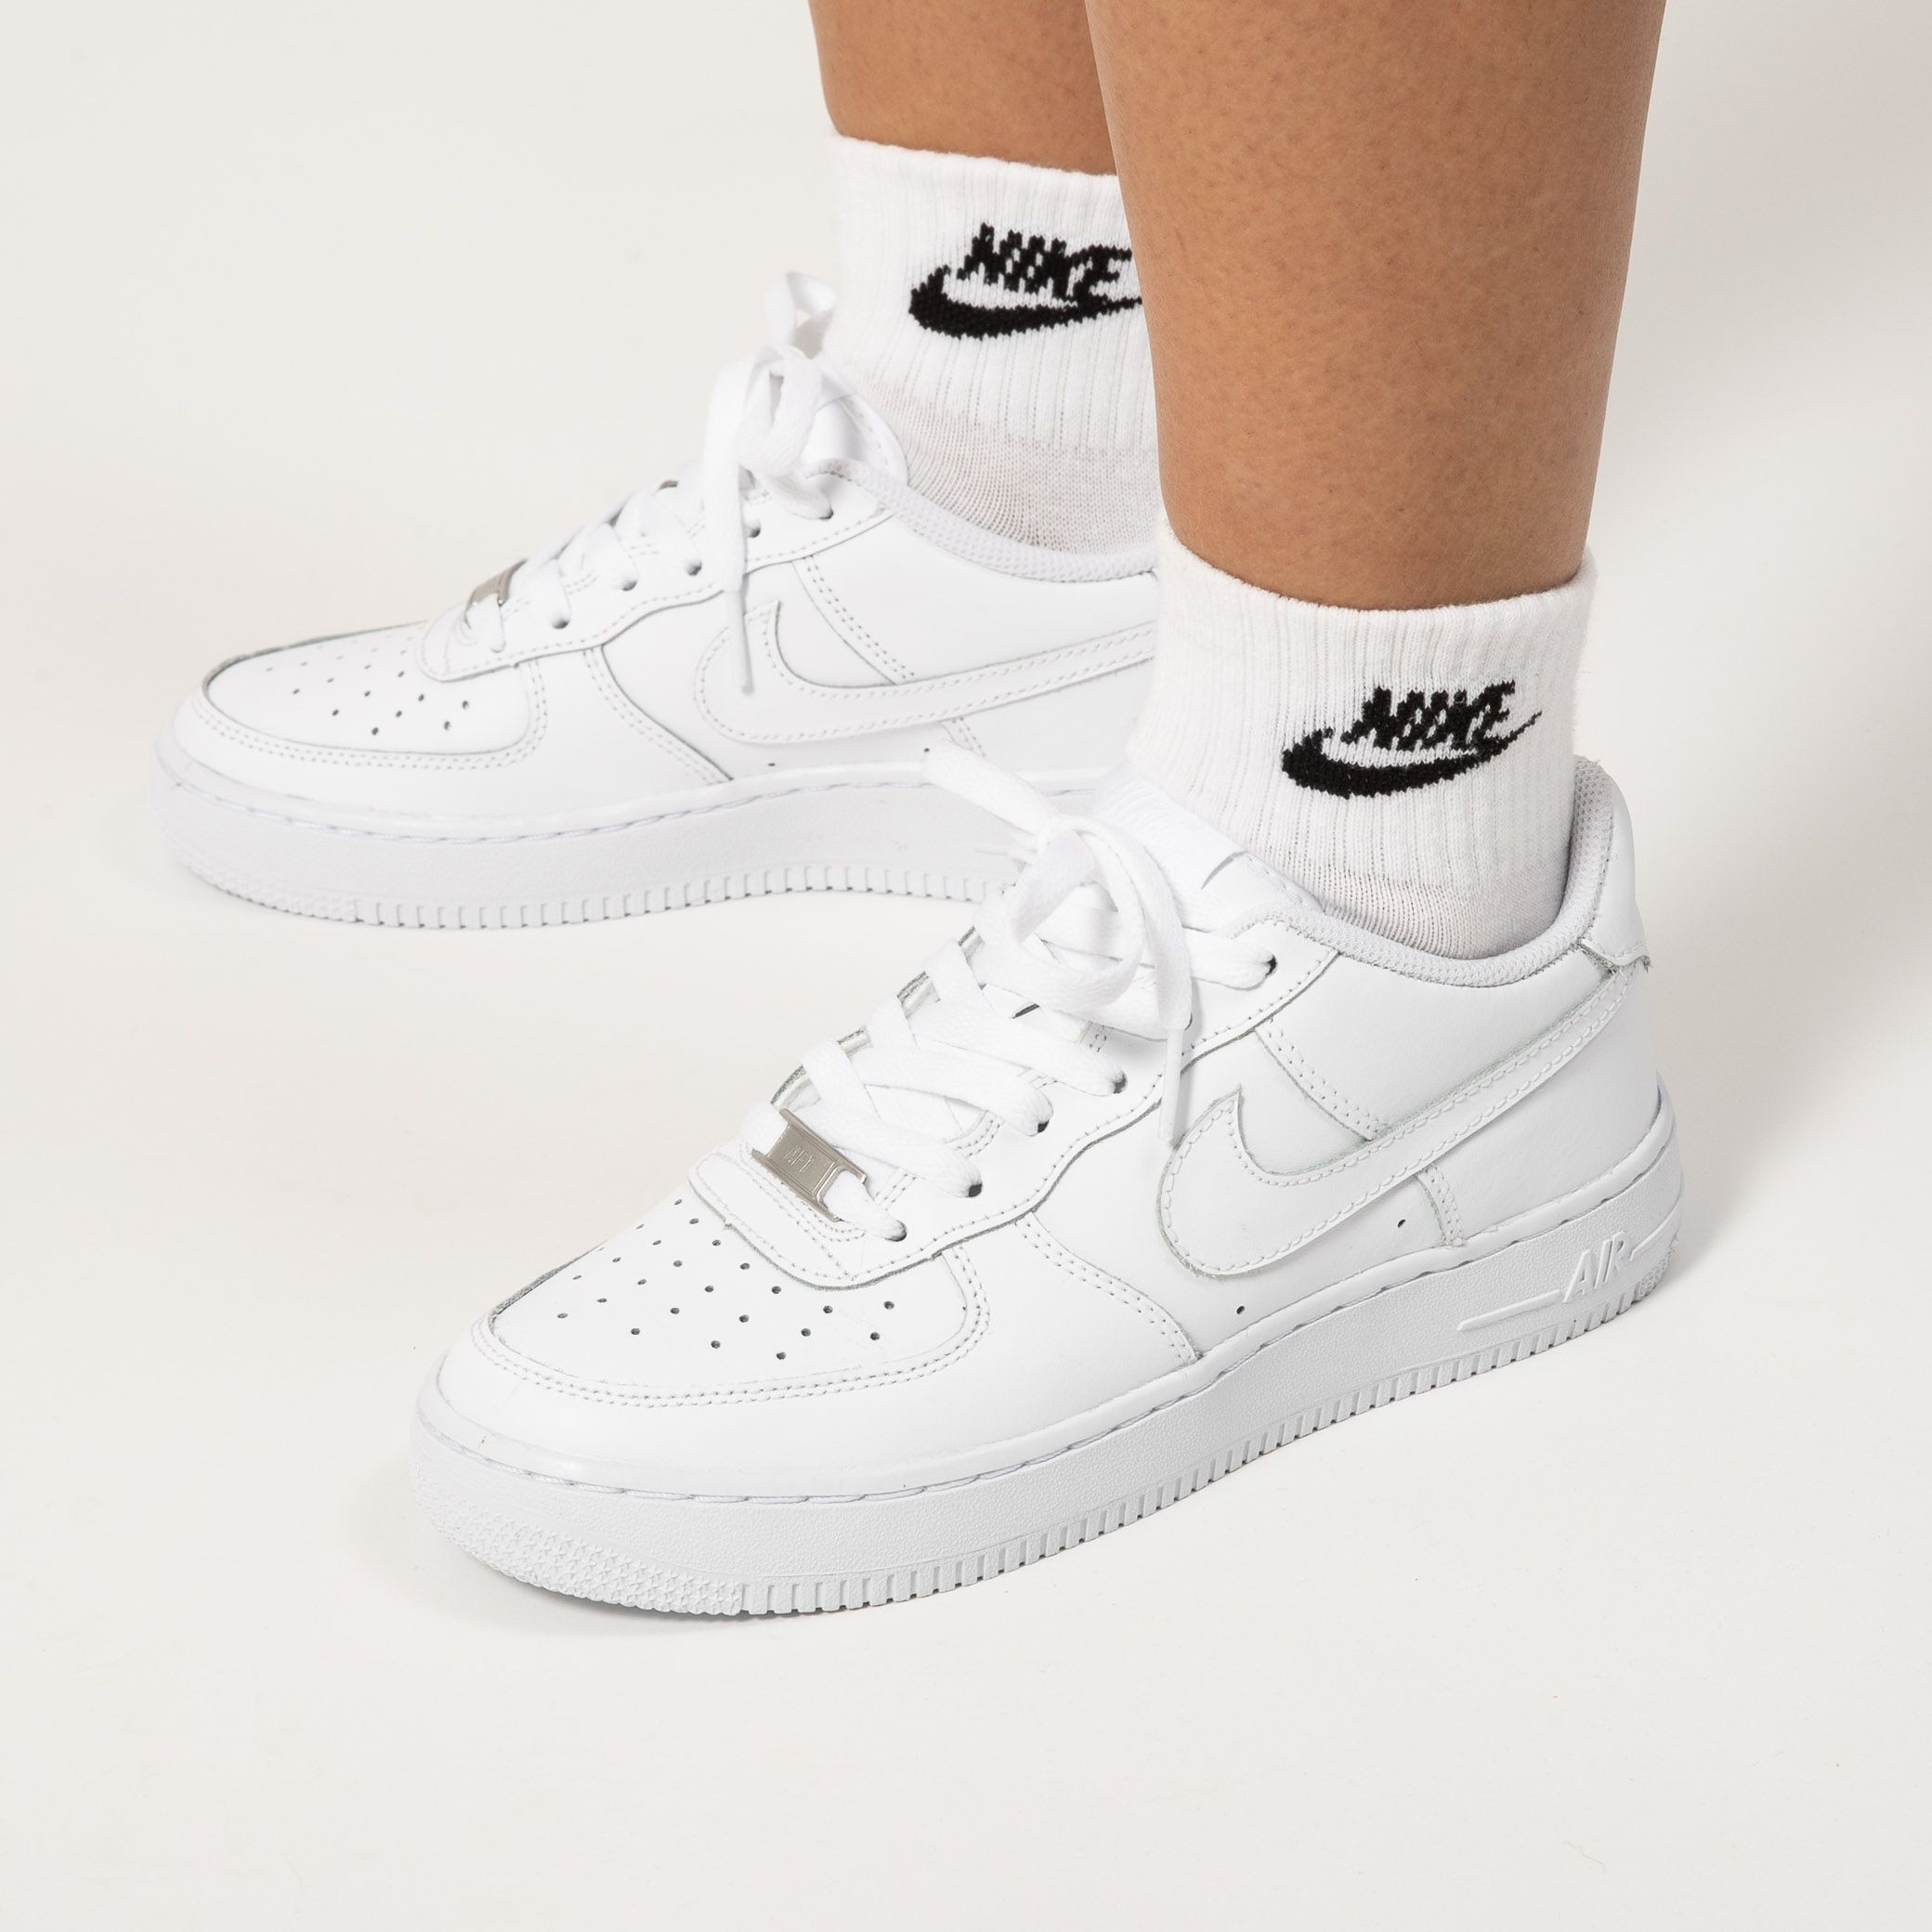 voor Uil Leidingen Titolo on Twitter: "New. Nike Wmns Air Force 1 "White"⁠ L i n k ➡️  https://t.co/KfnPmjWB8m ⁠ US 5.5 (36) - US 9.5 (41)⁠ 🔎 DD8959-100⁠ ⁠  #titoloWOMAN⁠ #titolo⁠ #nike⁠ #airforce1⁠ #white⁠ #titoloshop  https://t.co/3dyJTixsDP" / Twitter